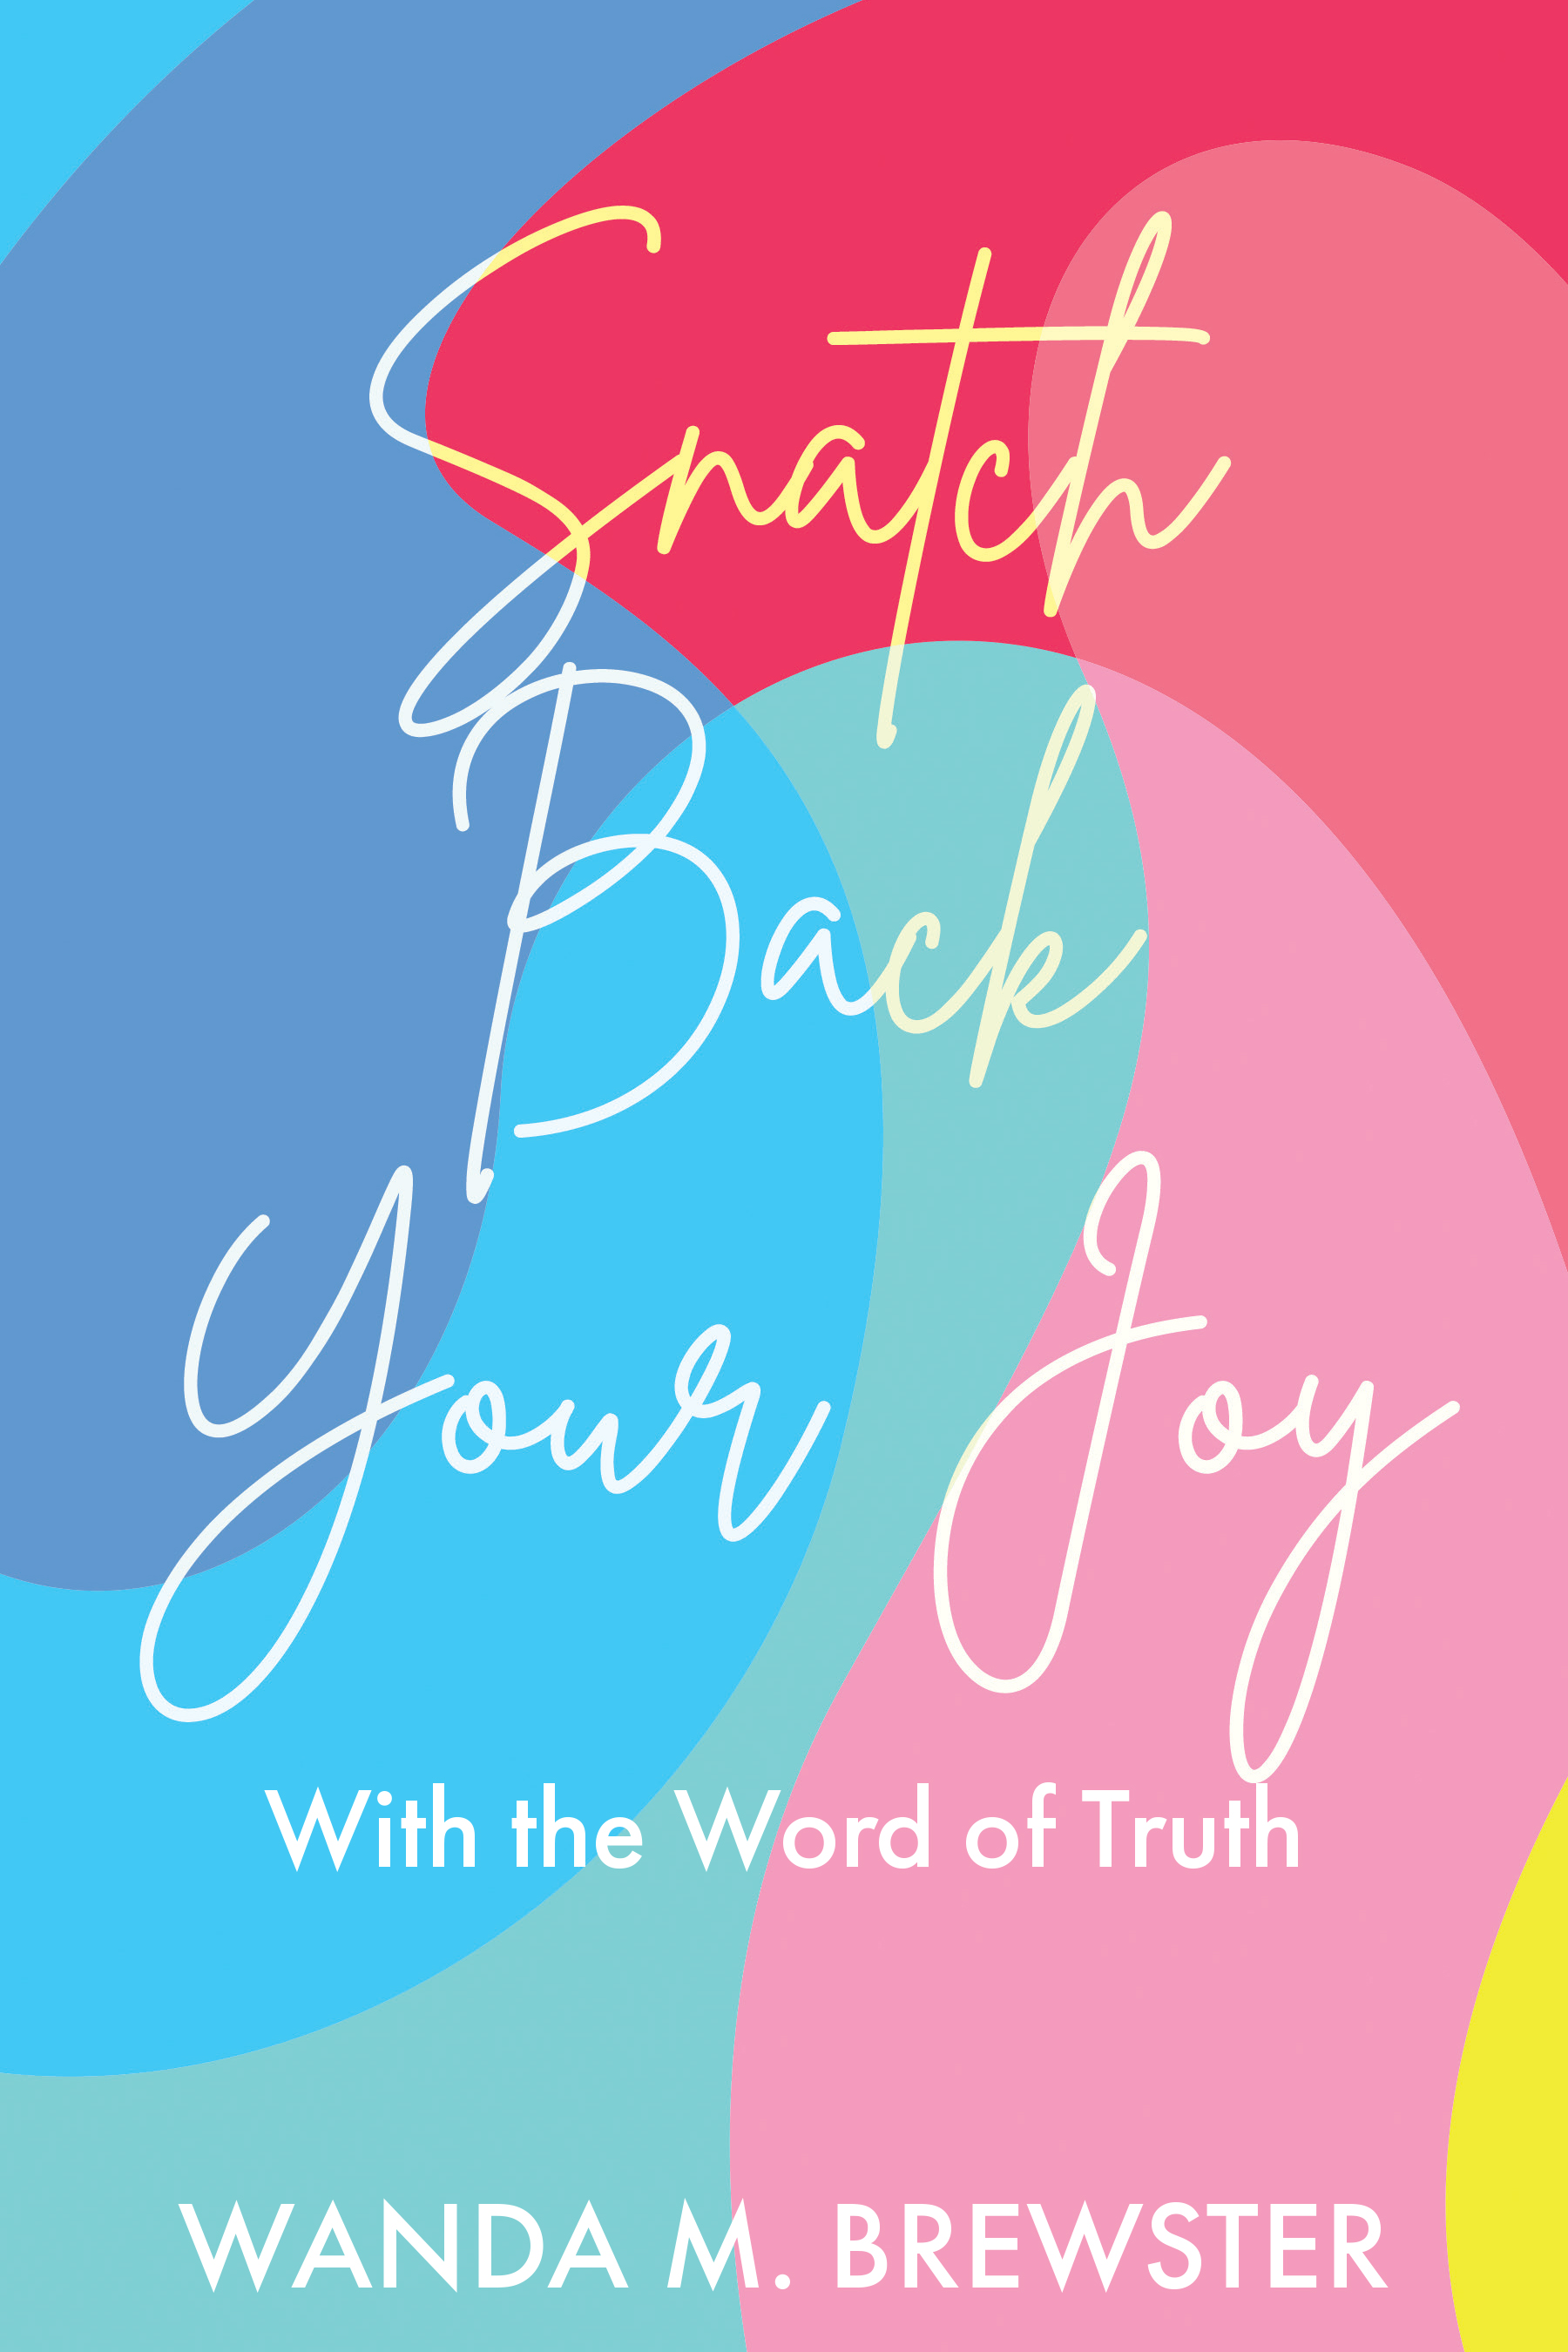 Wanda M. Brewster’s Newly Released “Snatch Back Your Joy: With the Word of Truth” is a Refreshing Guide to Reclaiming and Maintaining Your Joy